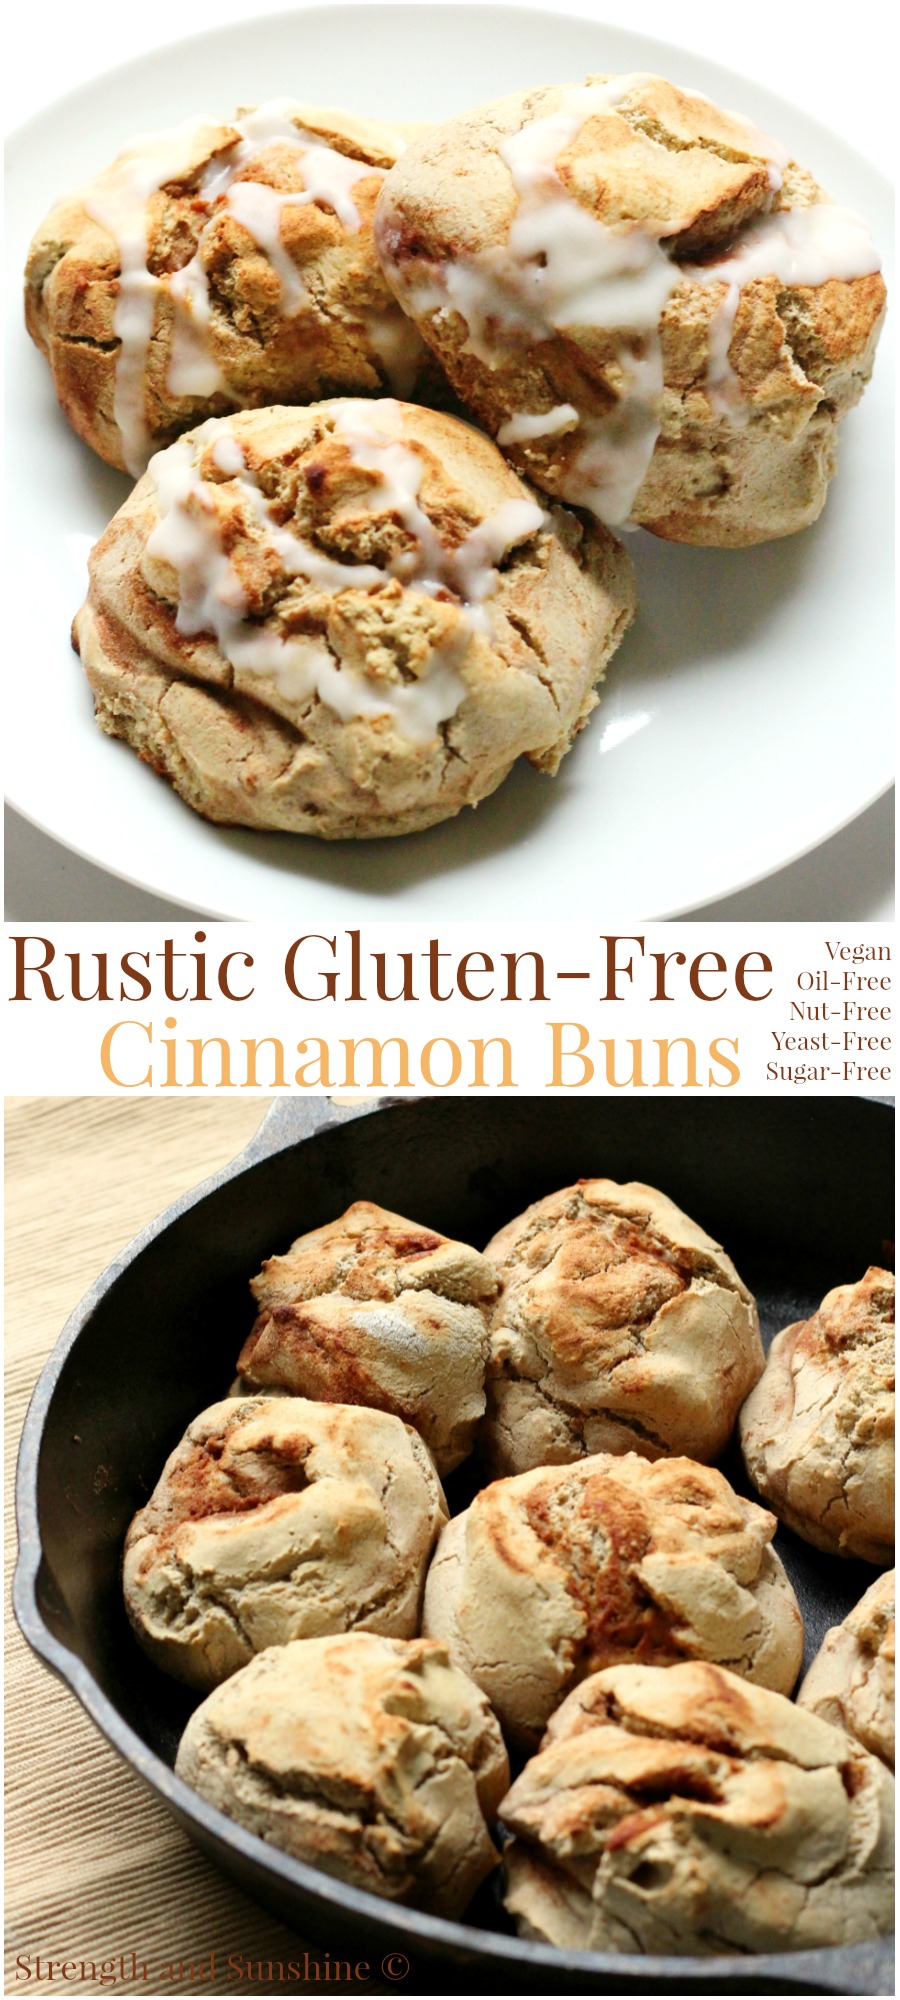 Rustic Gluten-Free Cinnamon Buns | Strength and Sunshine @RebeccaGF666 Rustic gluten-free cinnamon buns that are vegan, oil-free, sugar-free, nut-free, and no yeast! Lovingly made right in a cast iron skillet for extra flavor and charm. A breakfast or brunch recipe that will leave you feeling warm and cozy!